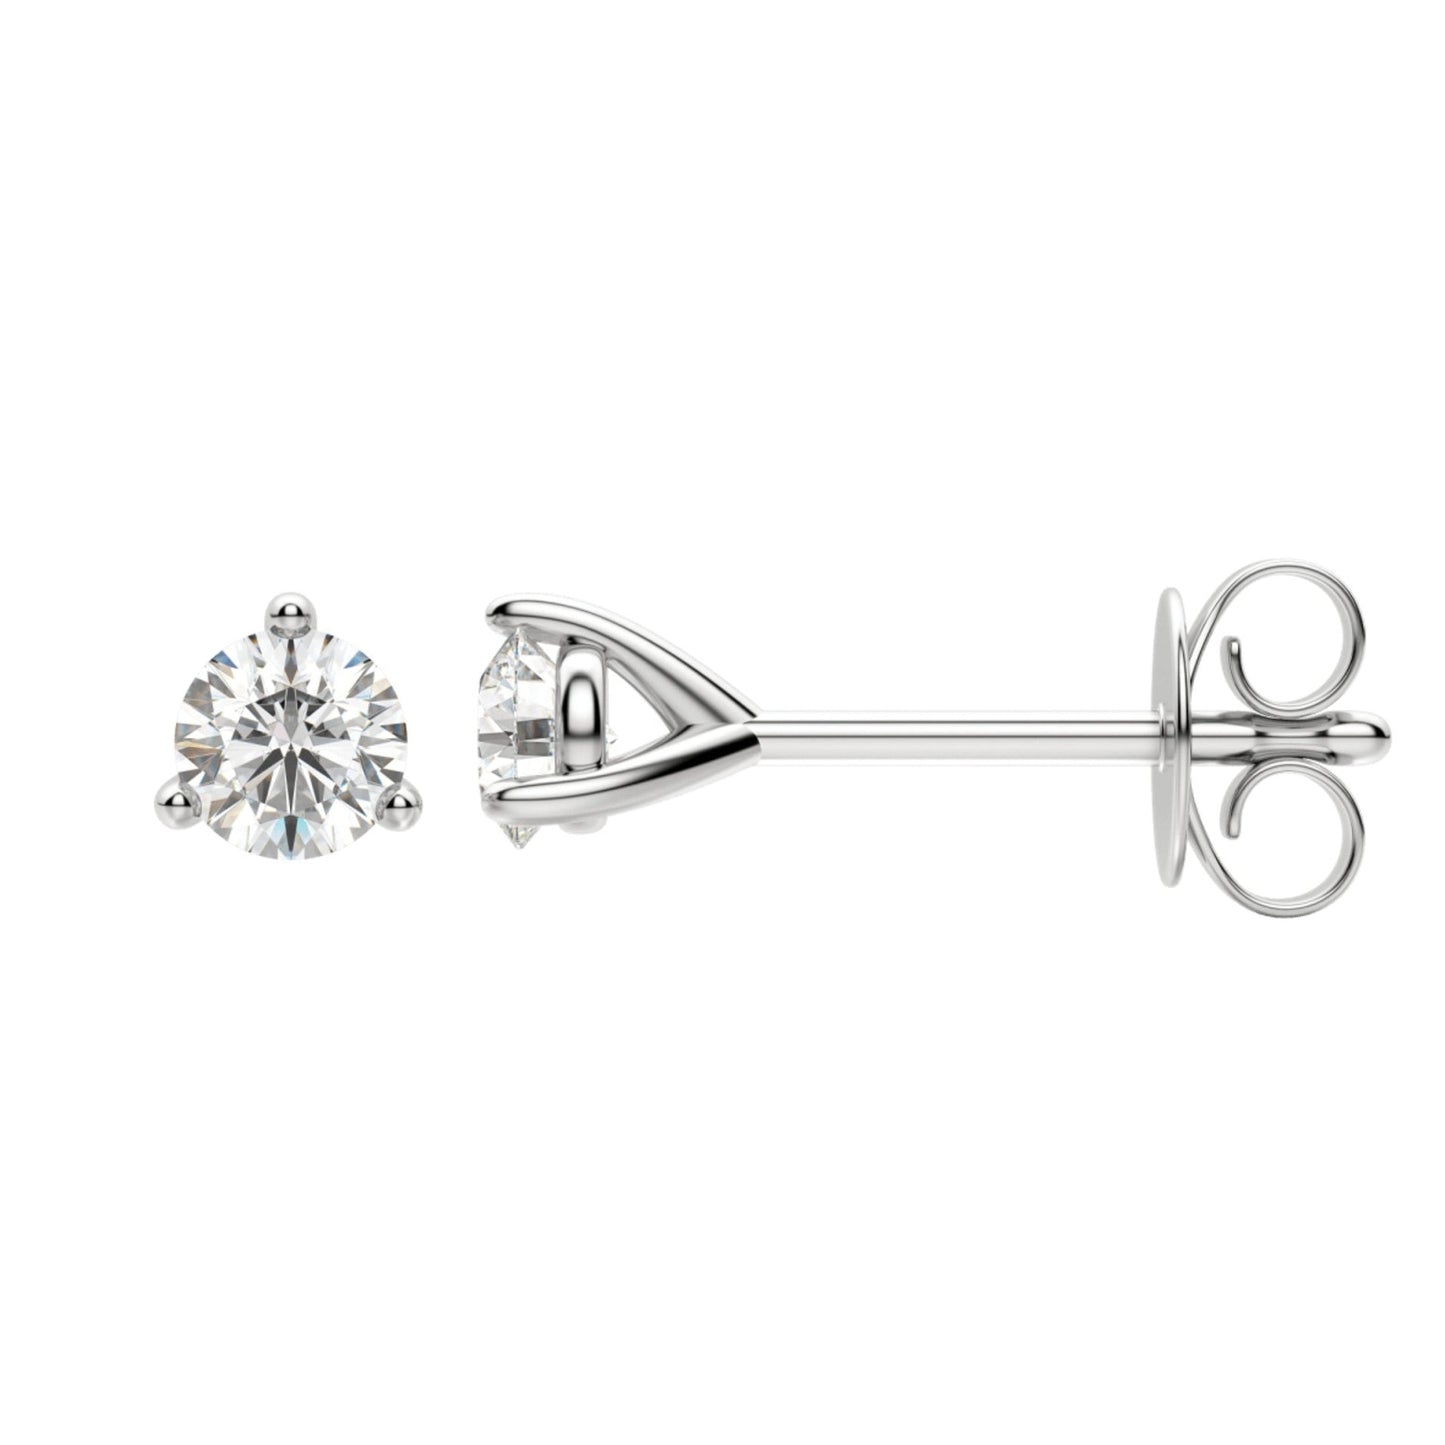 0.50 TO 6.00 CT Round Cut Moissanite Stud Earrings